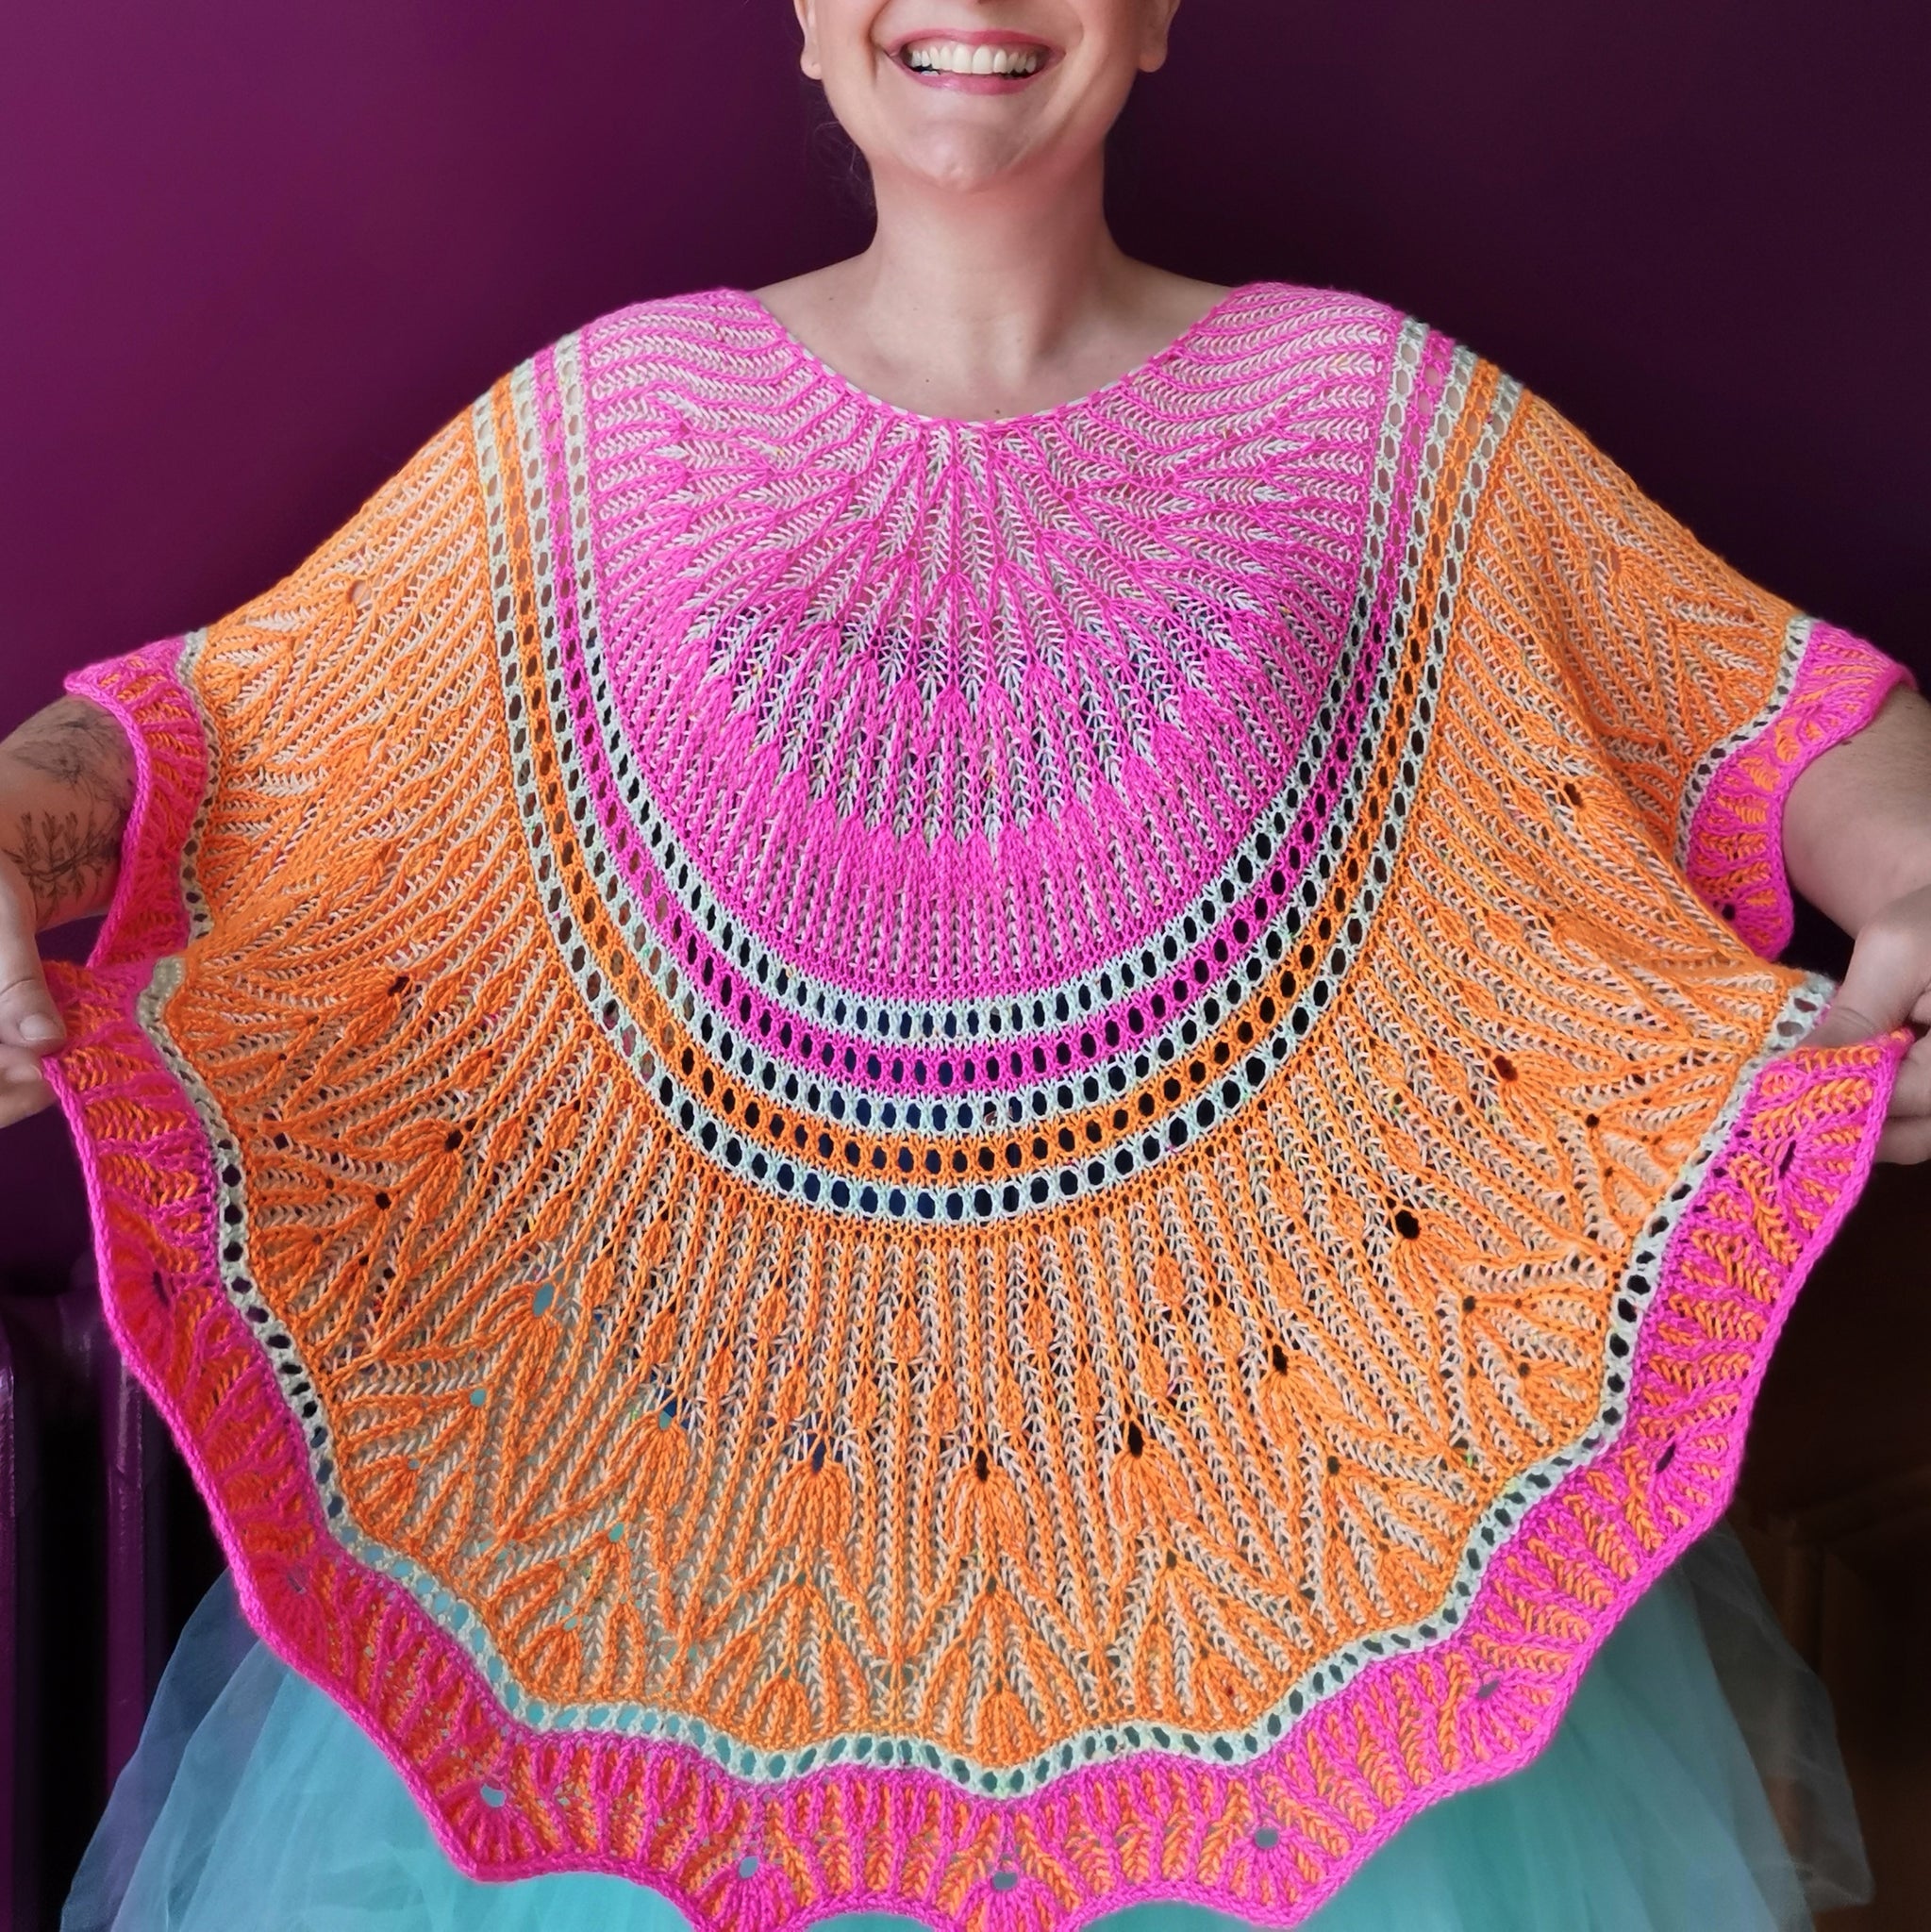 Ravelry: Go Girl 2022 pattern by Julie Knits in Paris